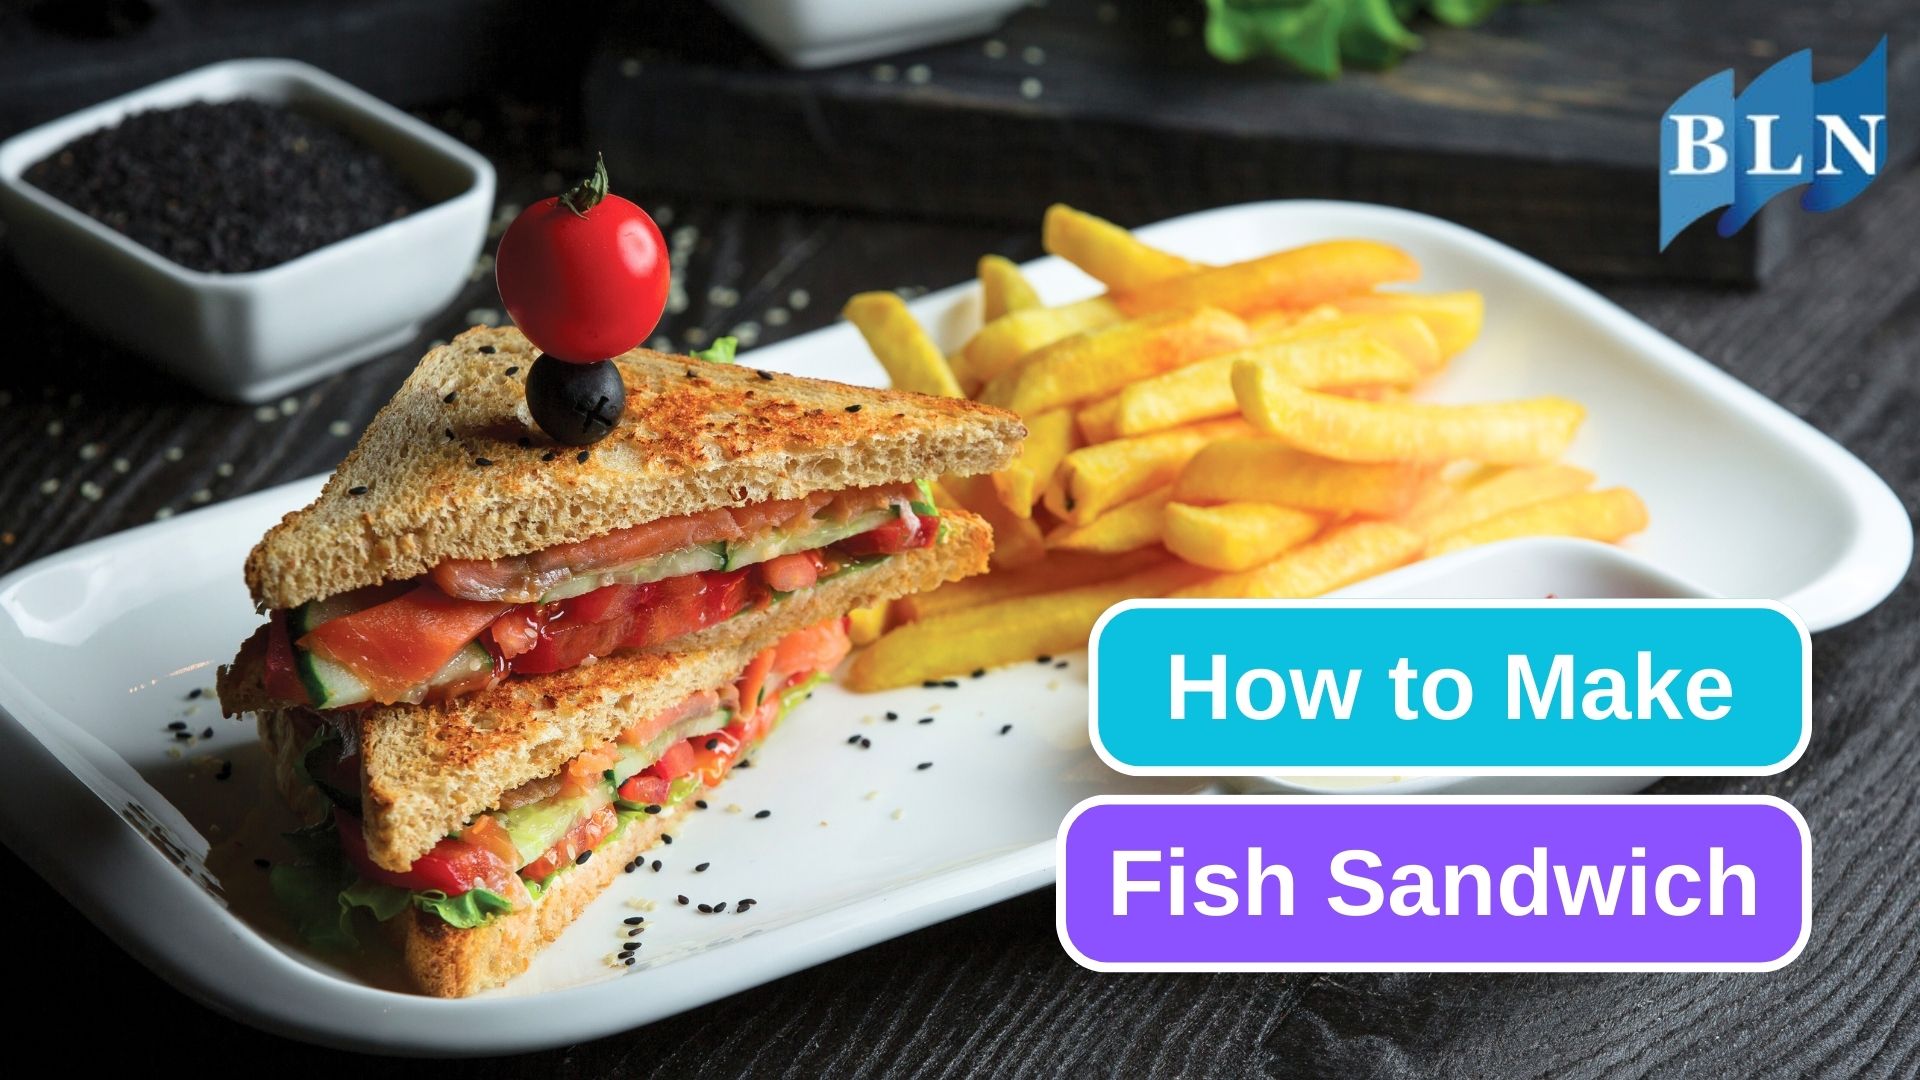 Delicious Fish Sandwich Recipe to Try at Home 